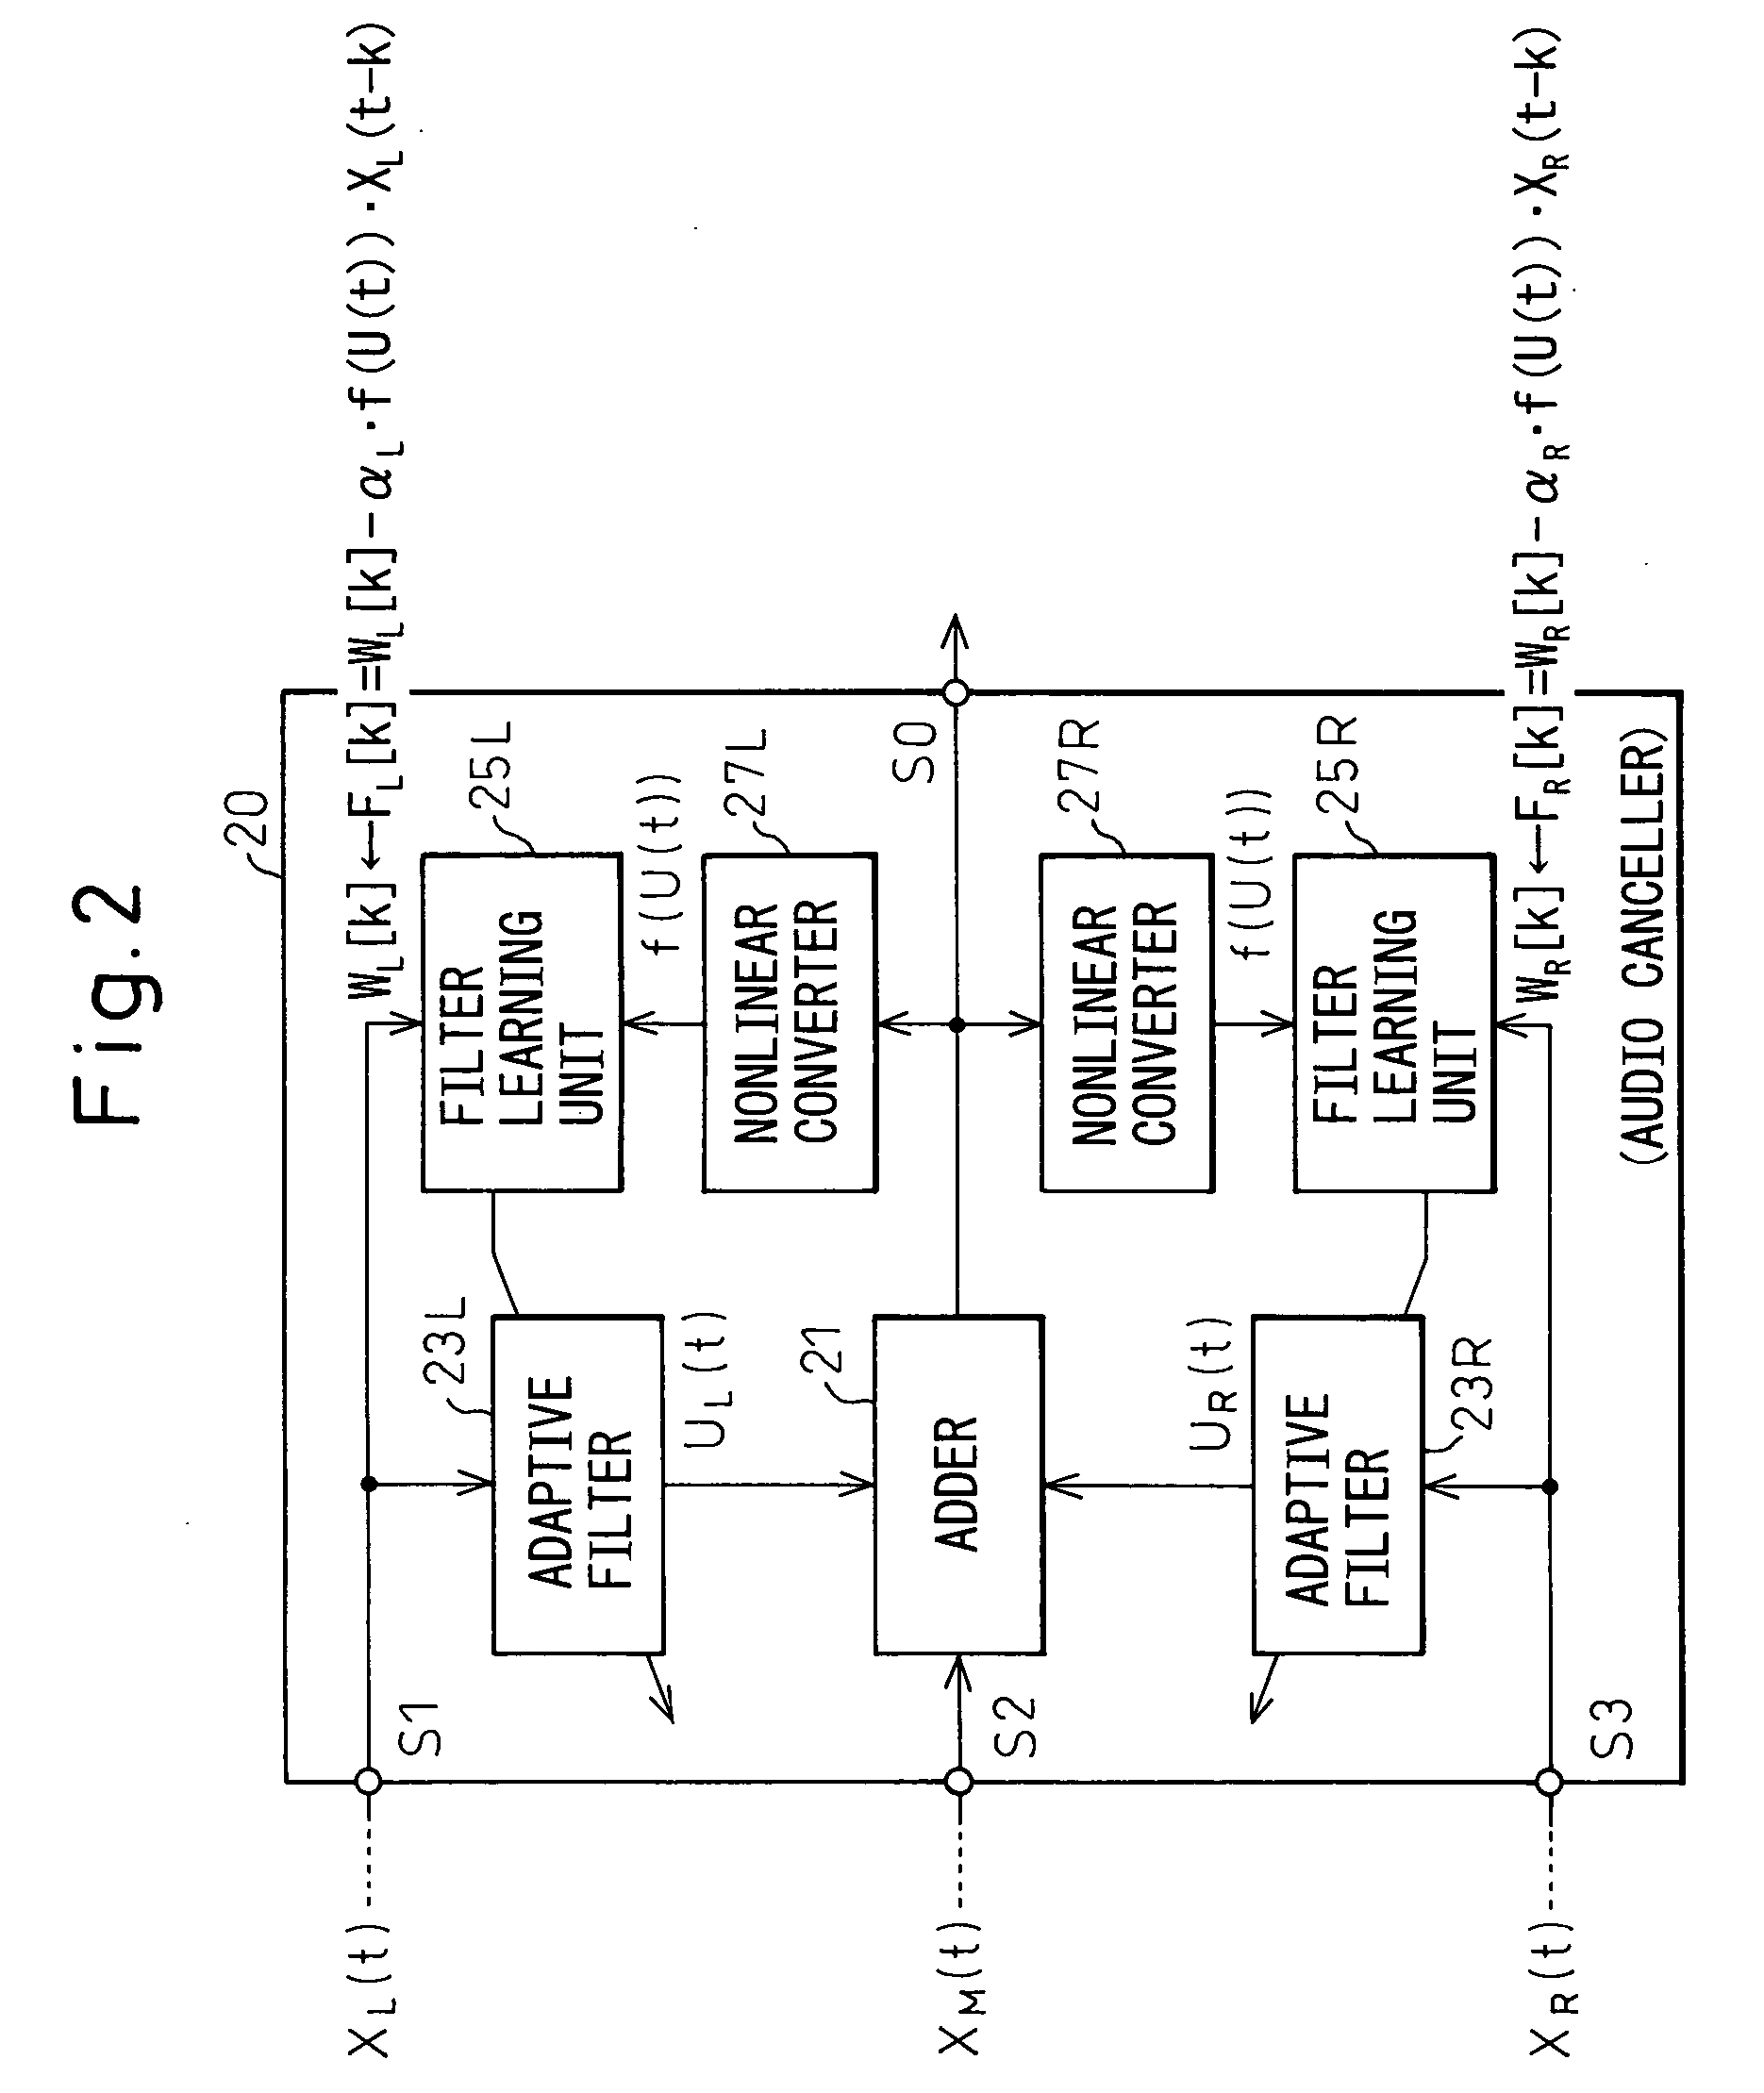 Noise cancellation system, speech recognition system, and car navigation system